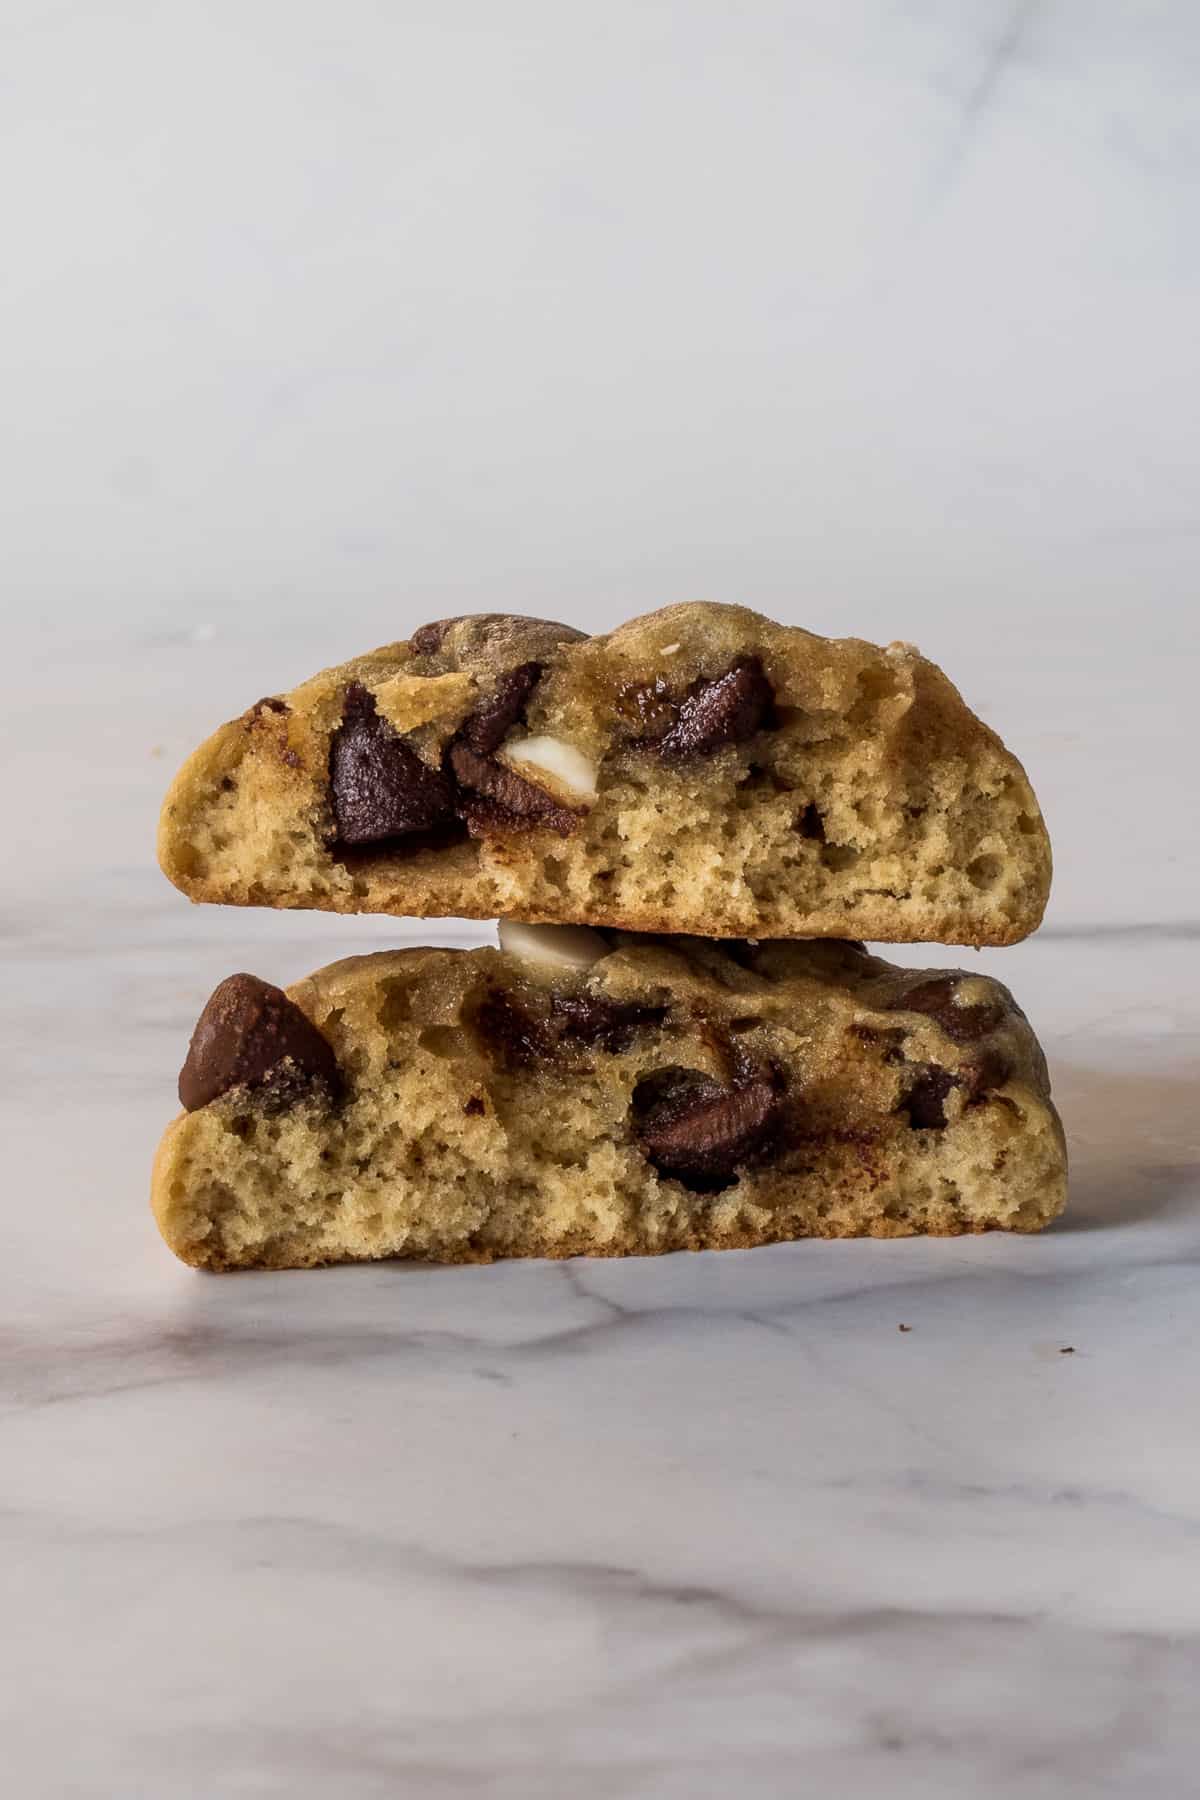 A chocolate chip cookie broken into 2